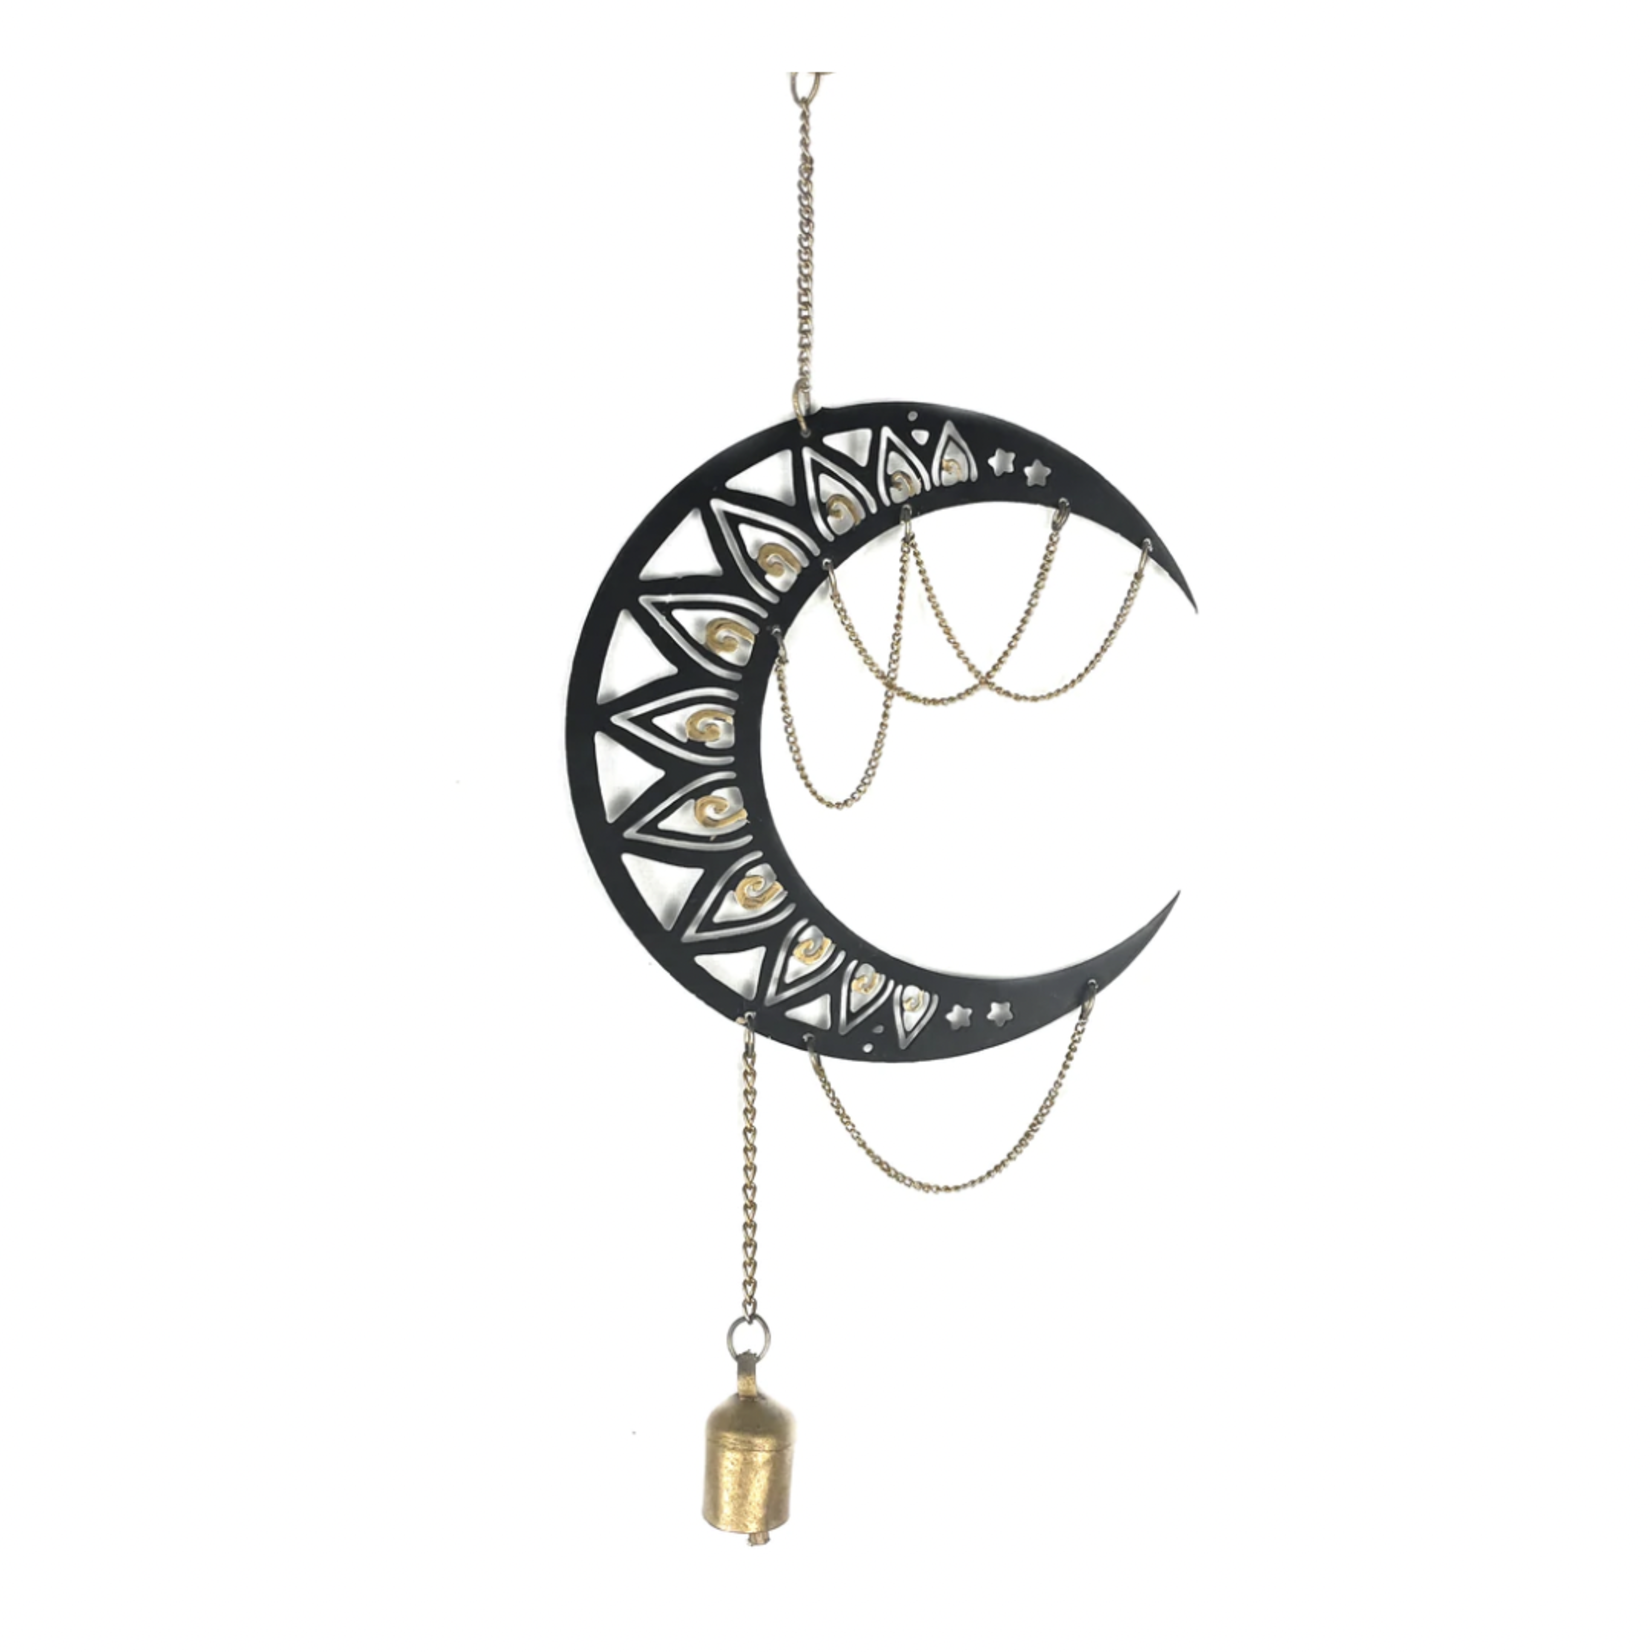 New Moon Chime